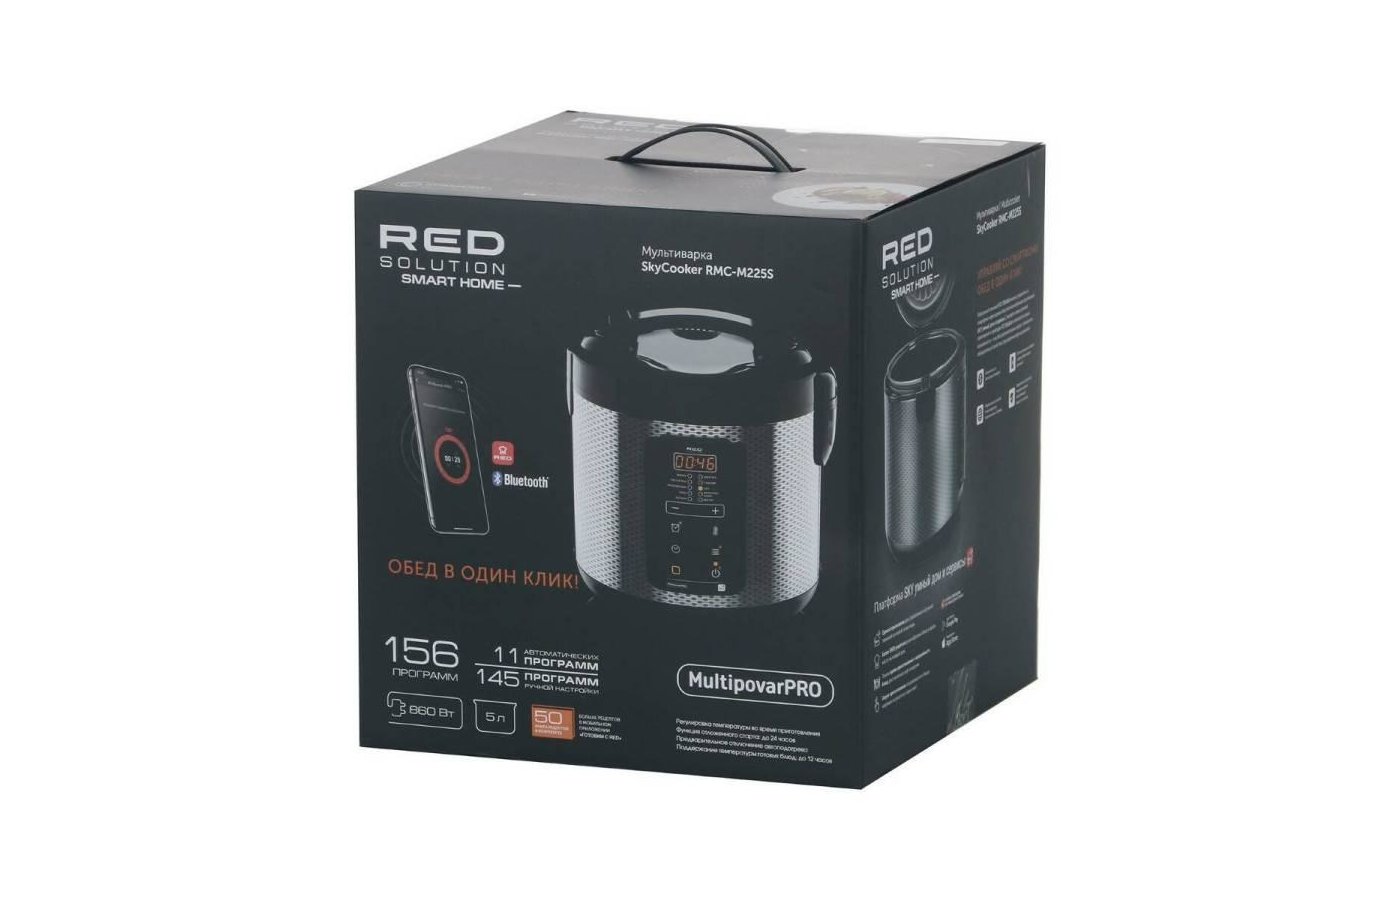 Мультиварка Red solution COLORCOOK RMC-88. Red solution SKYCOOKER RMC-m225s как пользоваться. Мультиварка red solution rmc m25